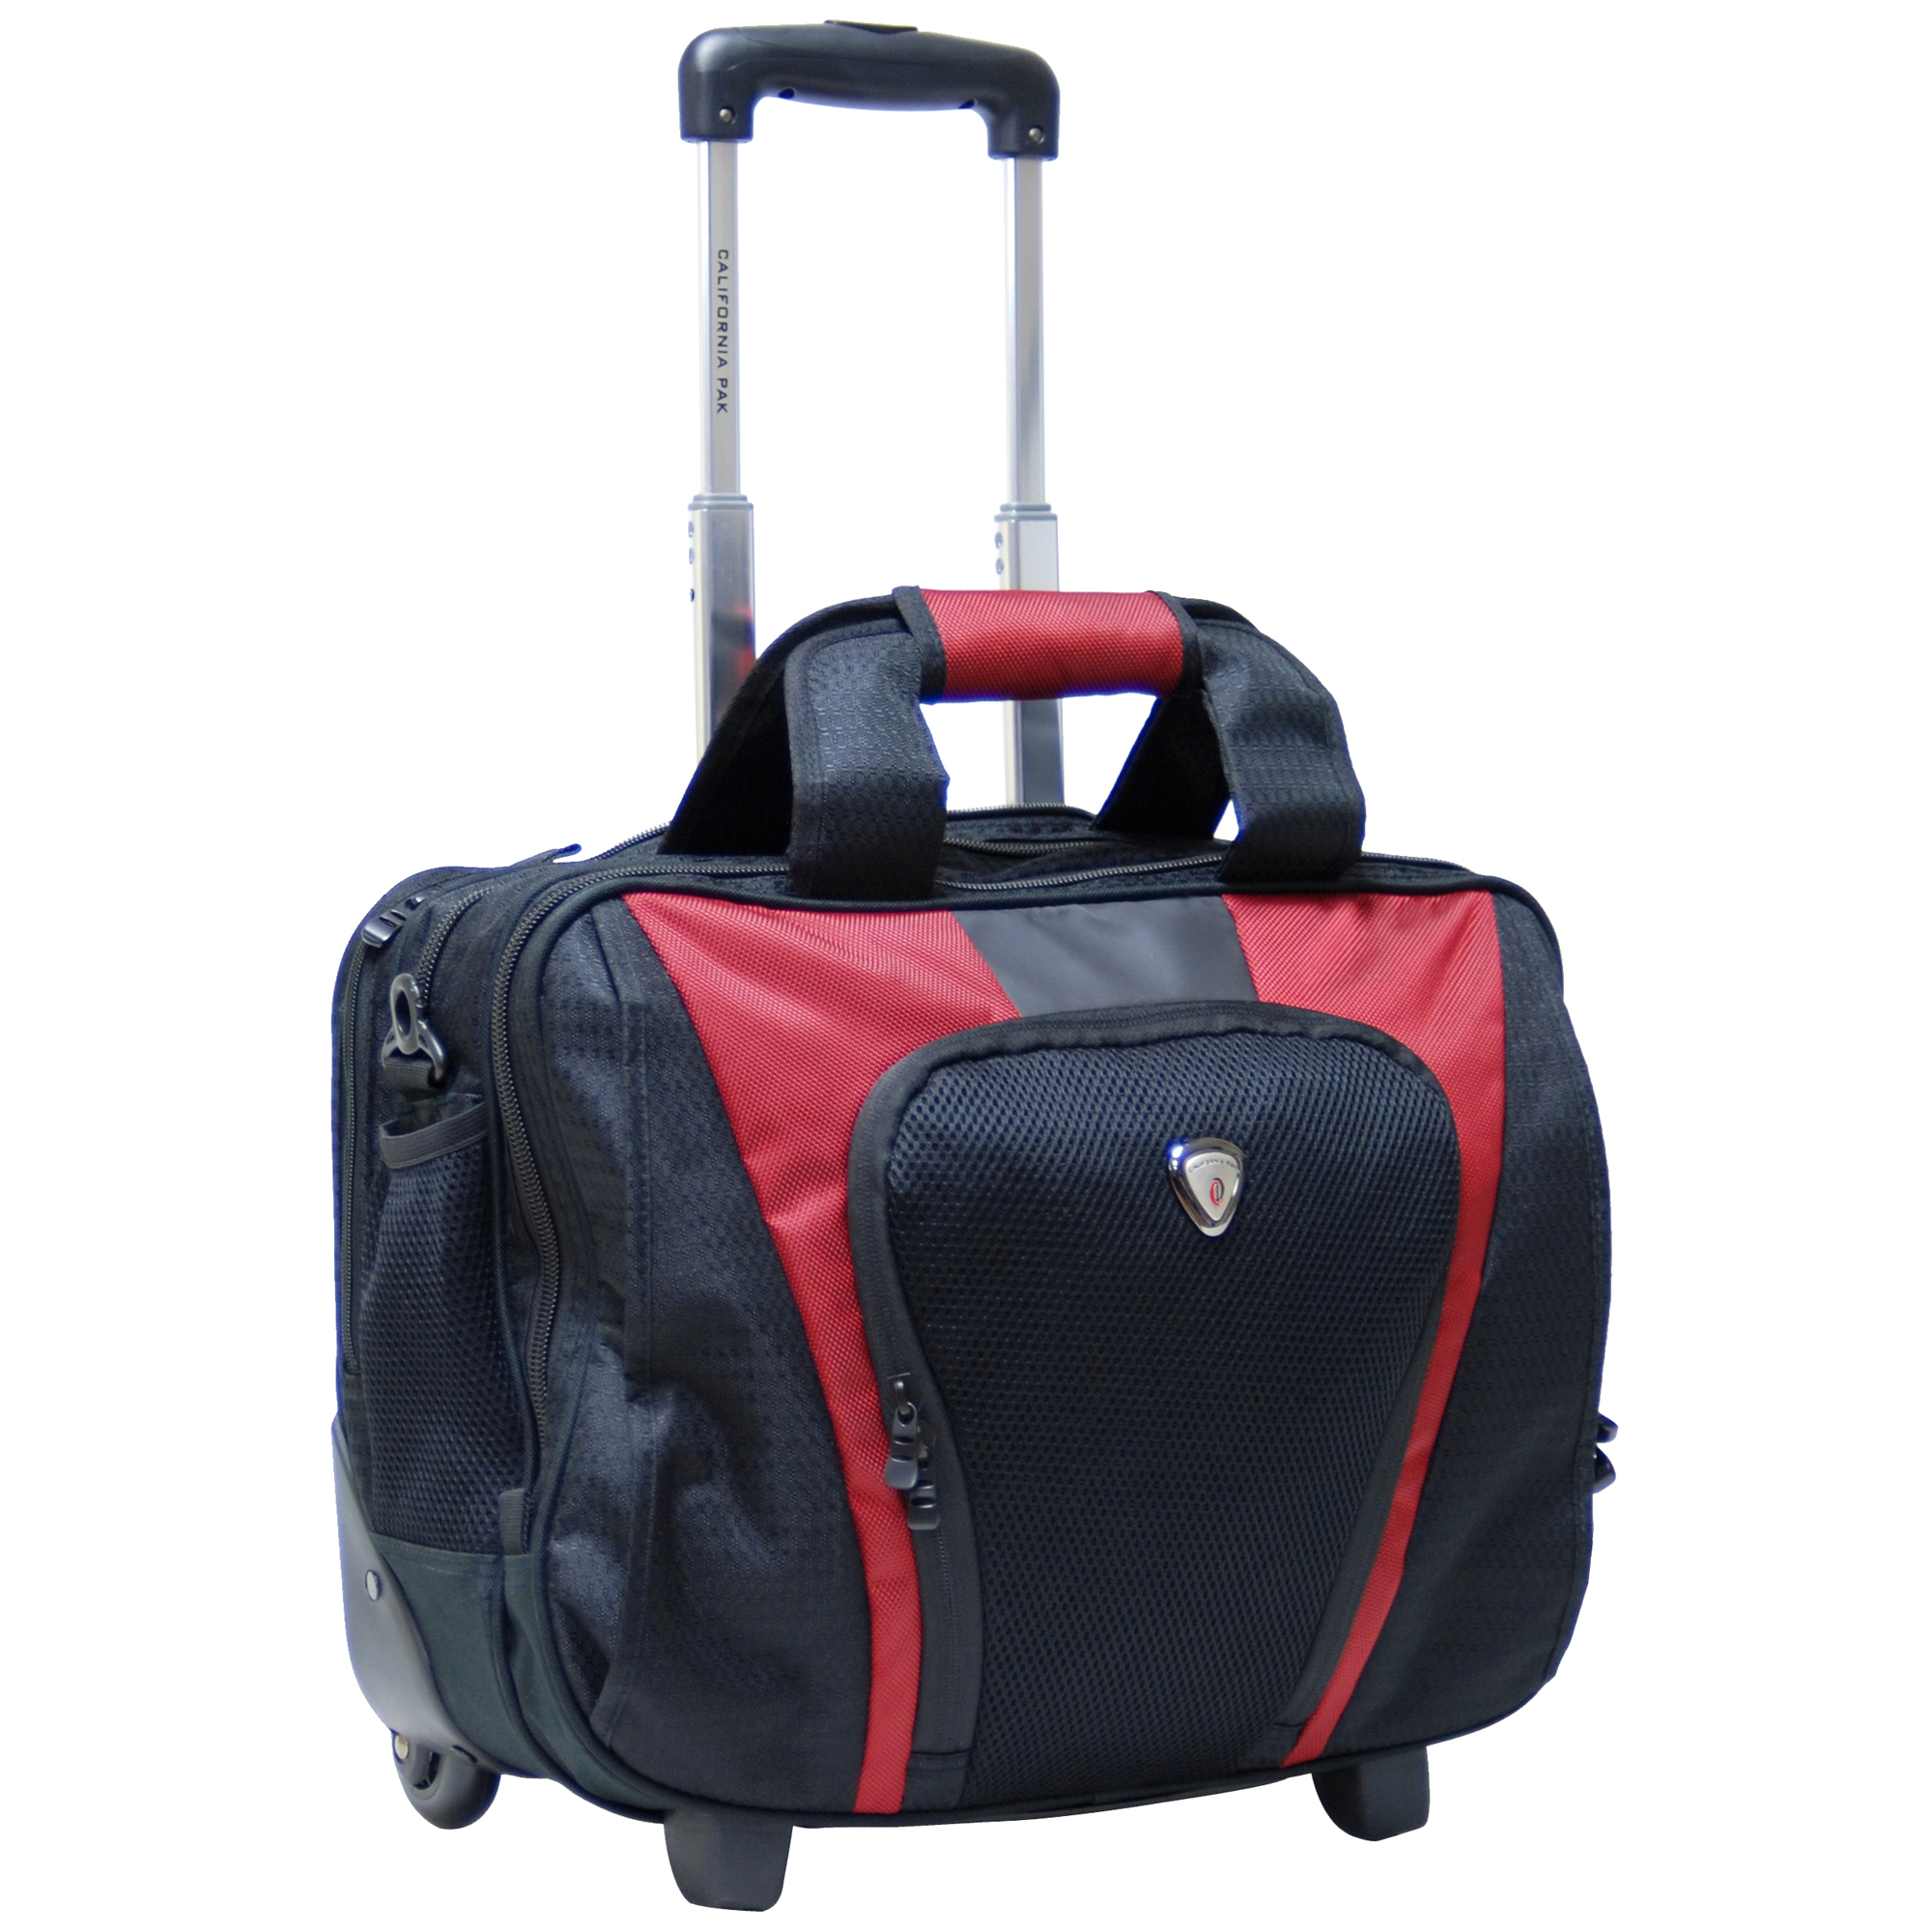 17" Deluxe Laptop Rolling Briefcase (Persuader 2)